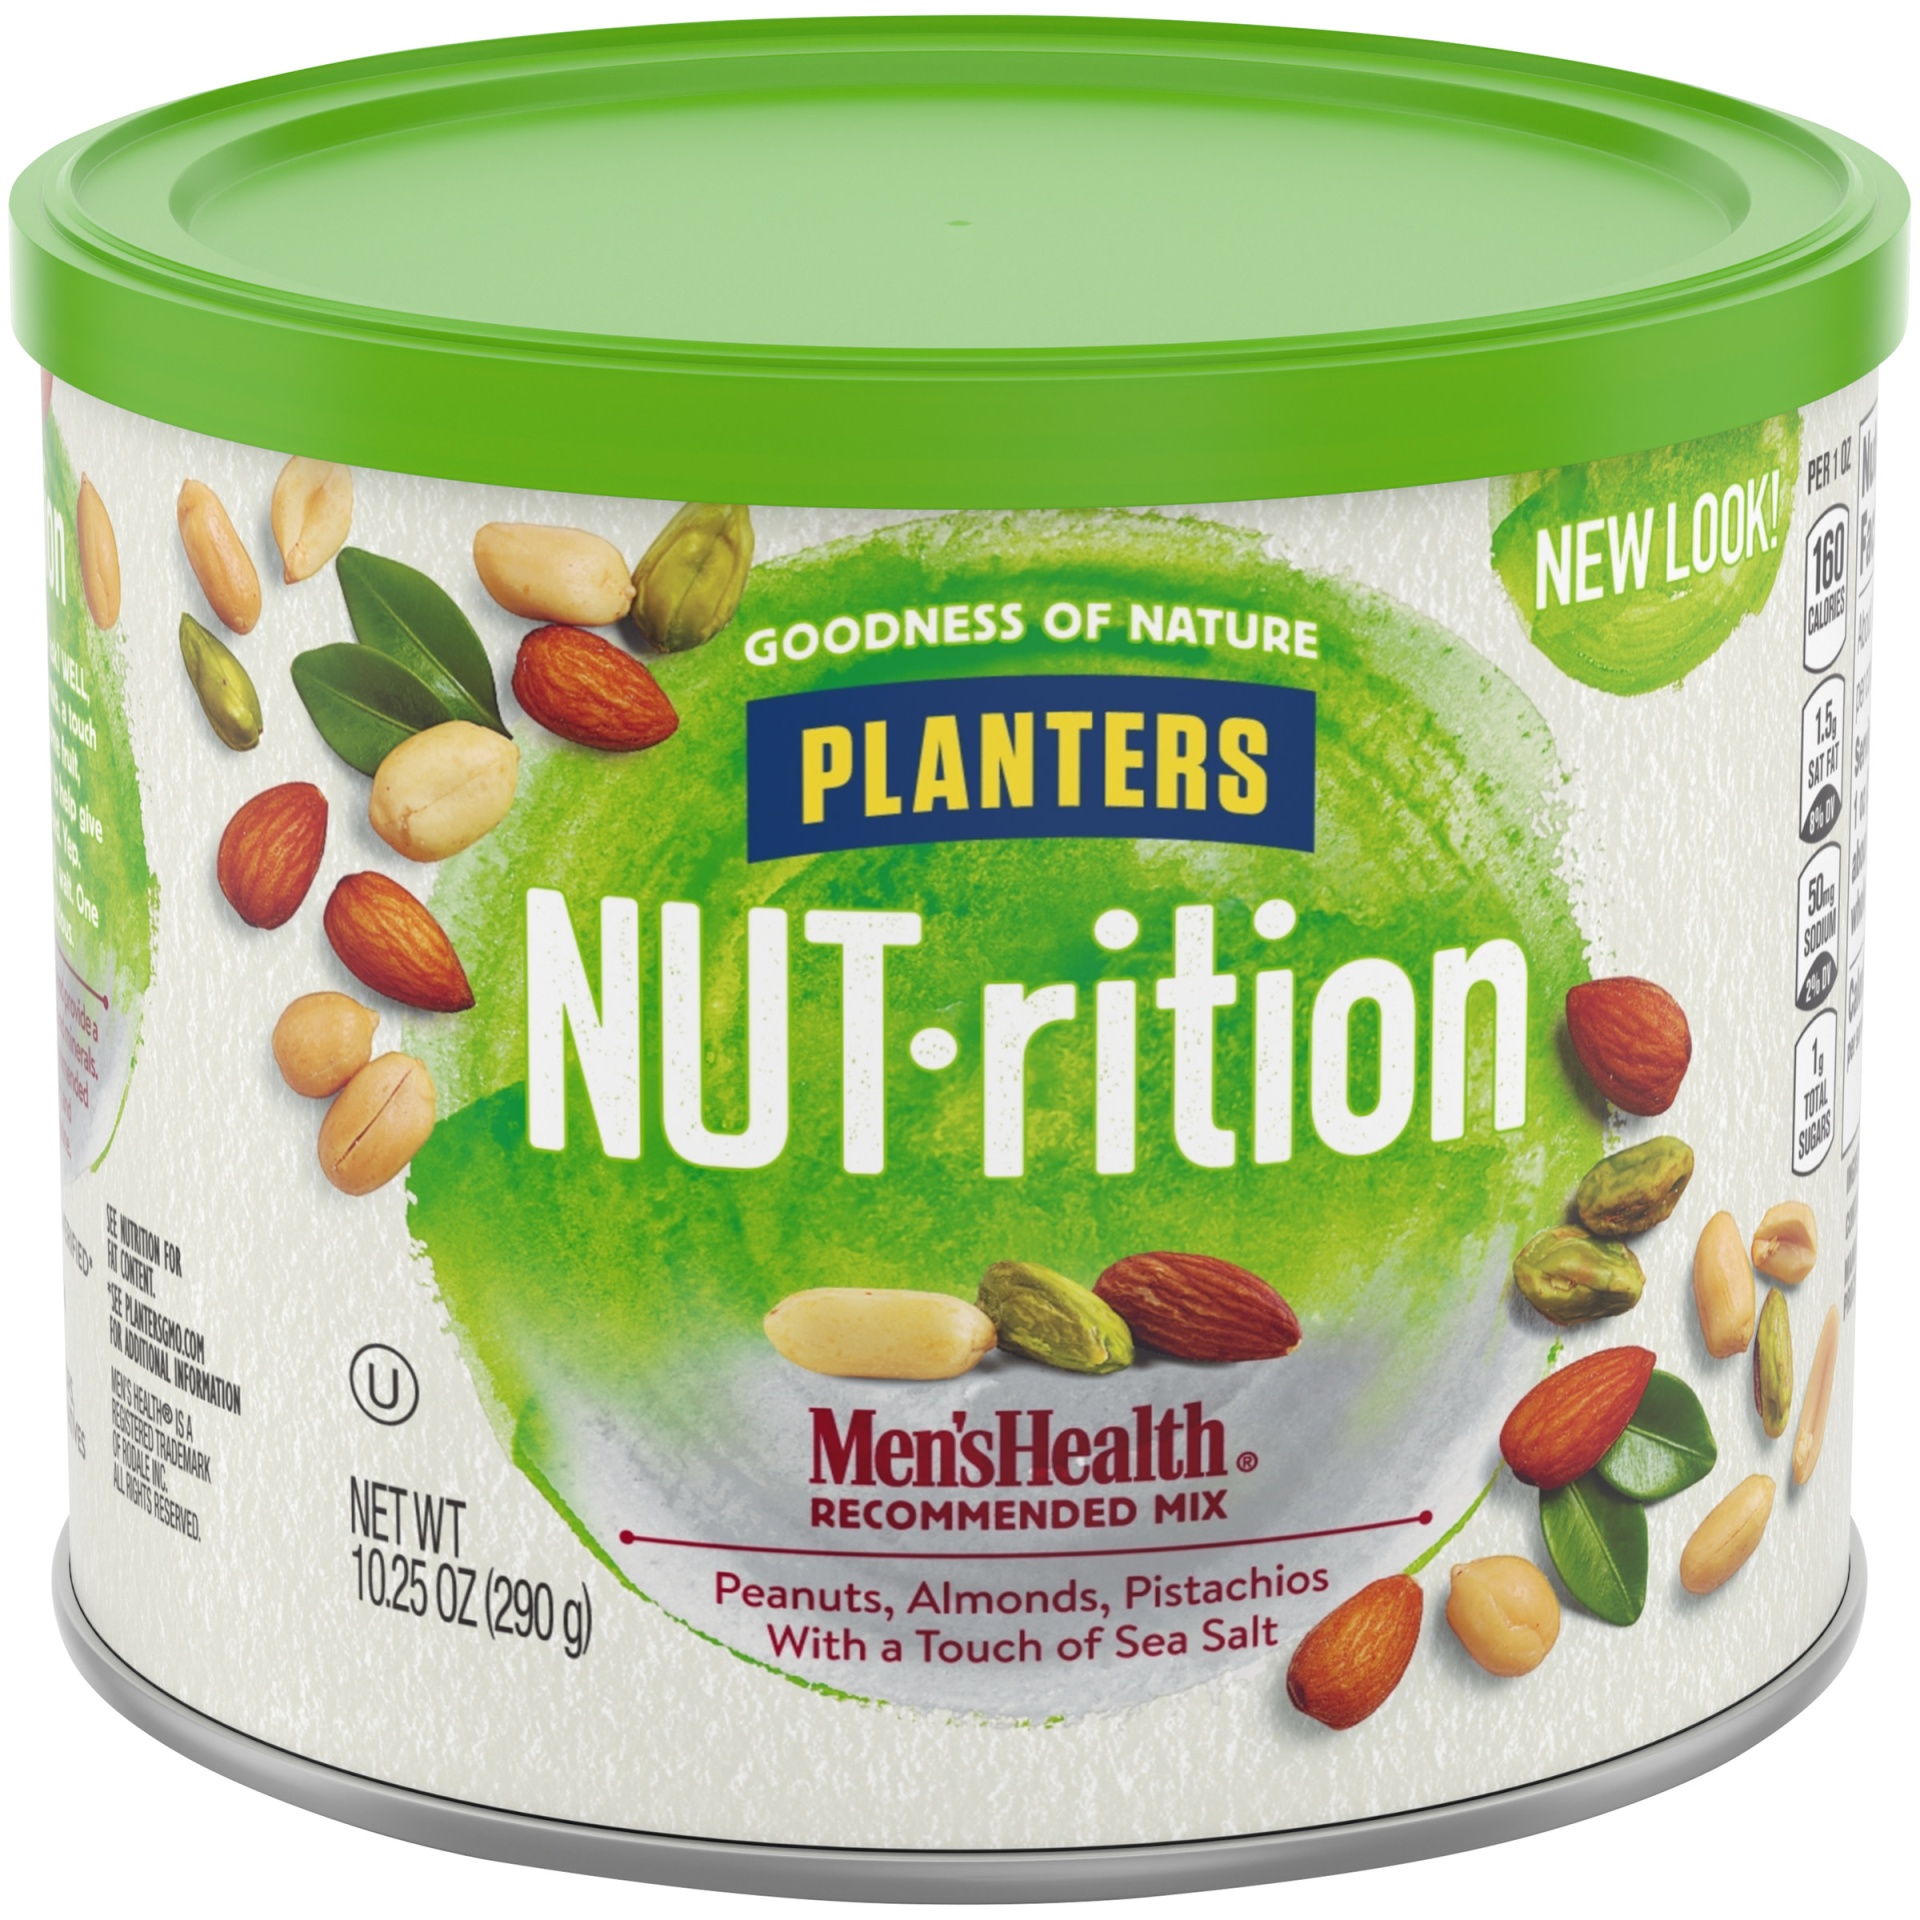 slide 1 of 2, NUT-rition Men's Health Recommended Nut Mix with Peanuts, Almonds, Pistachios & Sea Salt, 10.25 oz